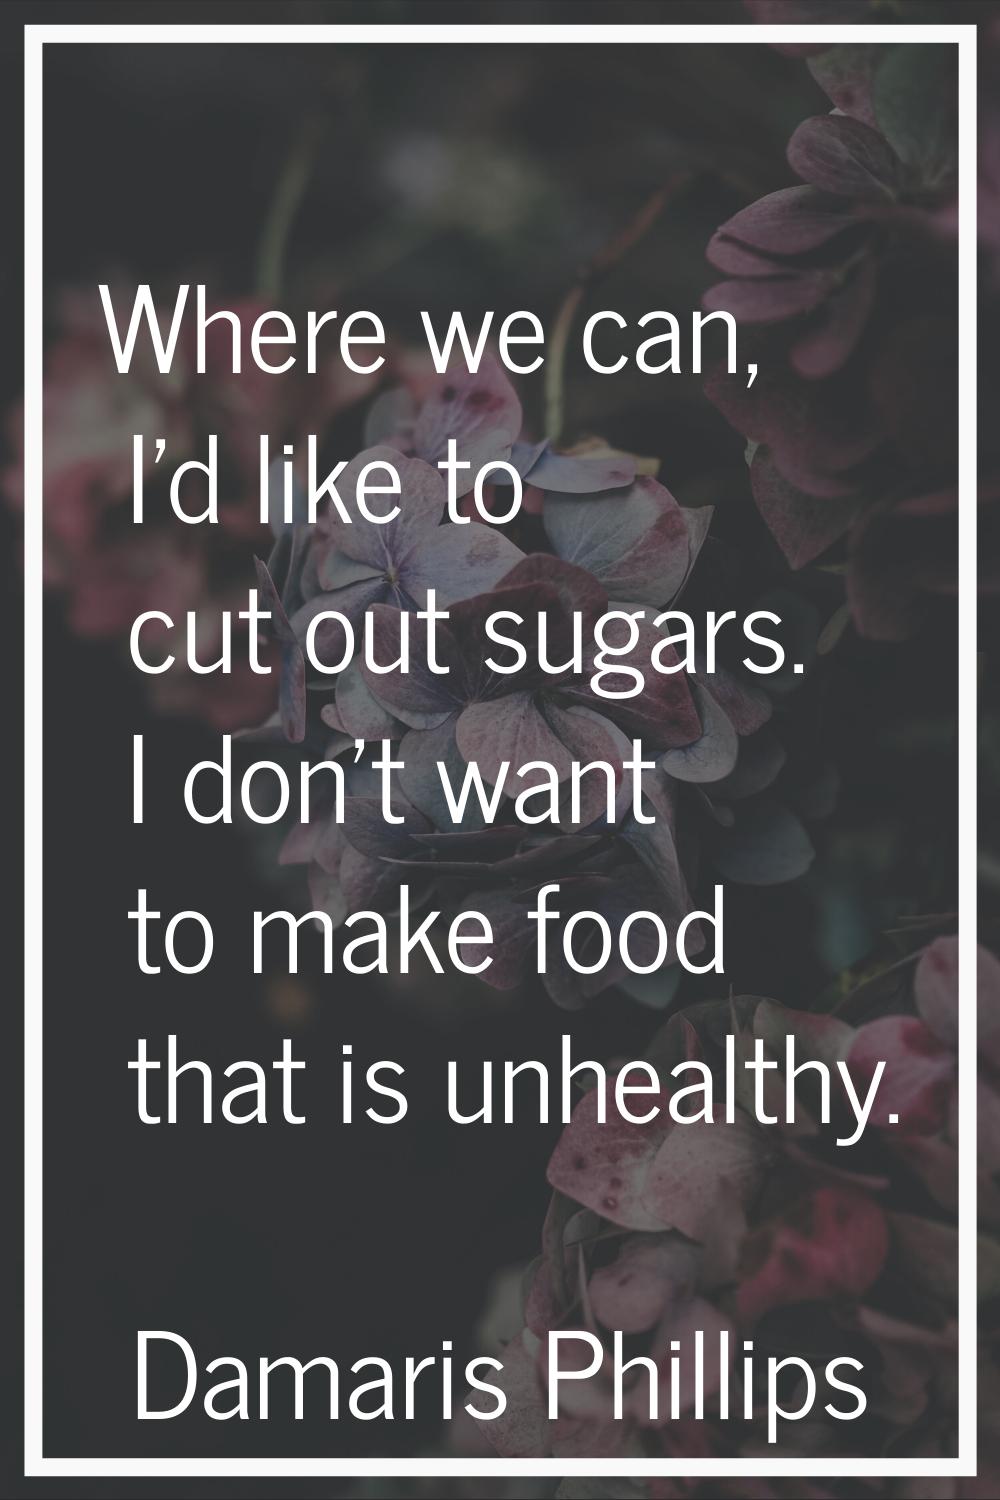 Where we can, I'd like to cut out sugars. I don't want to make food that is unhealthy.